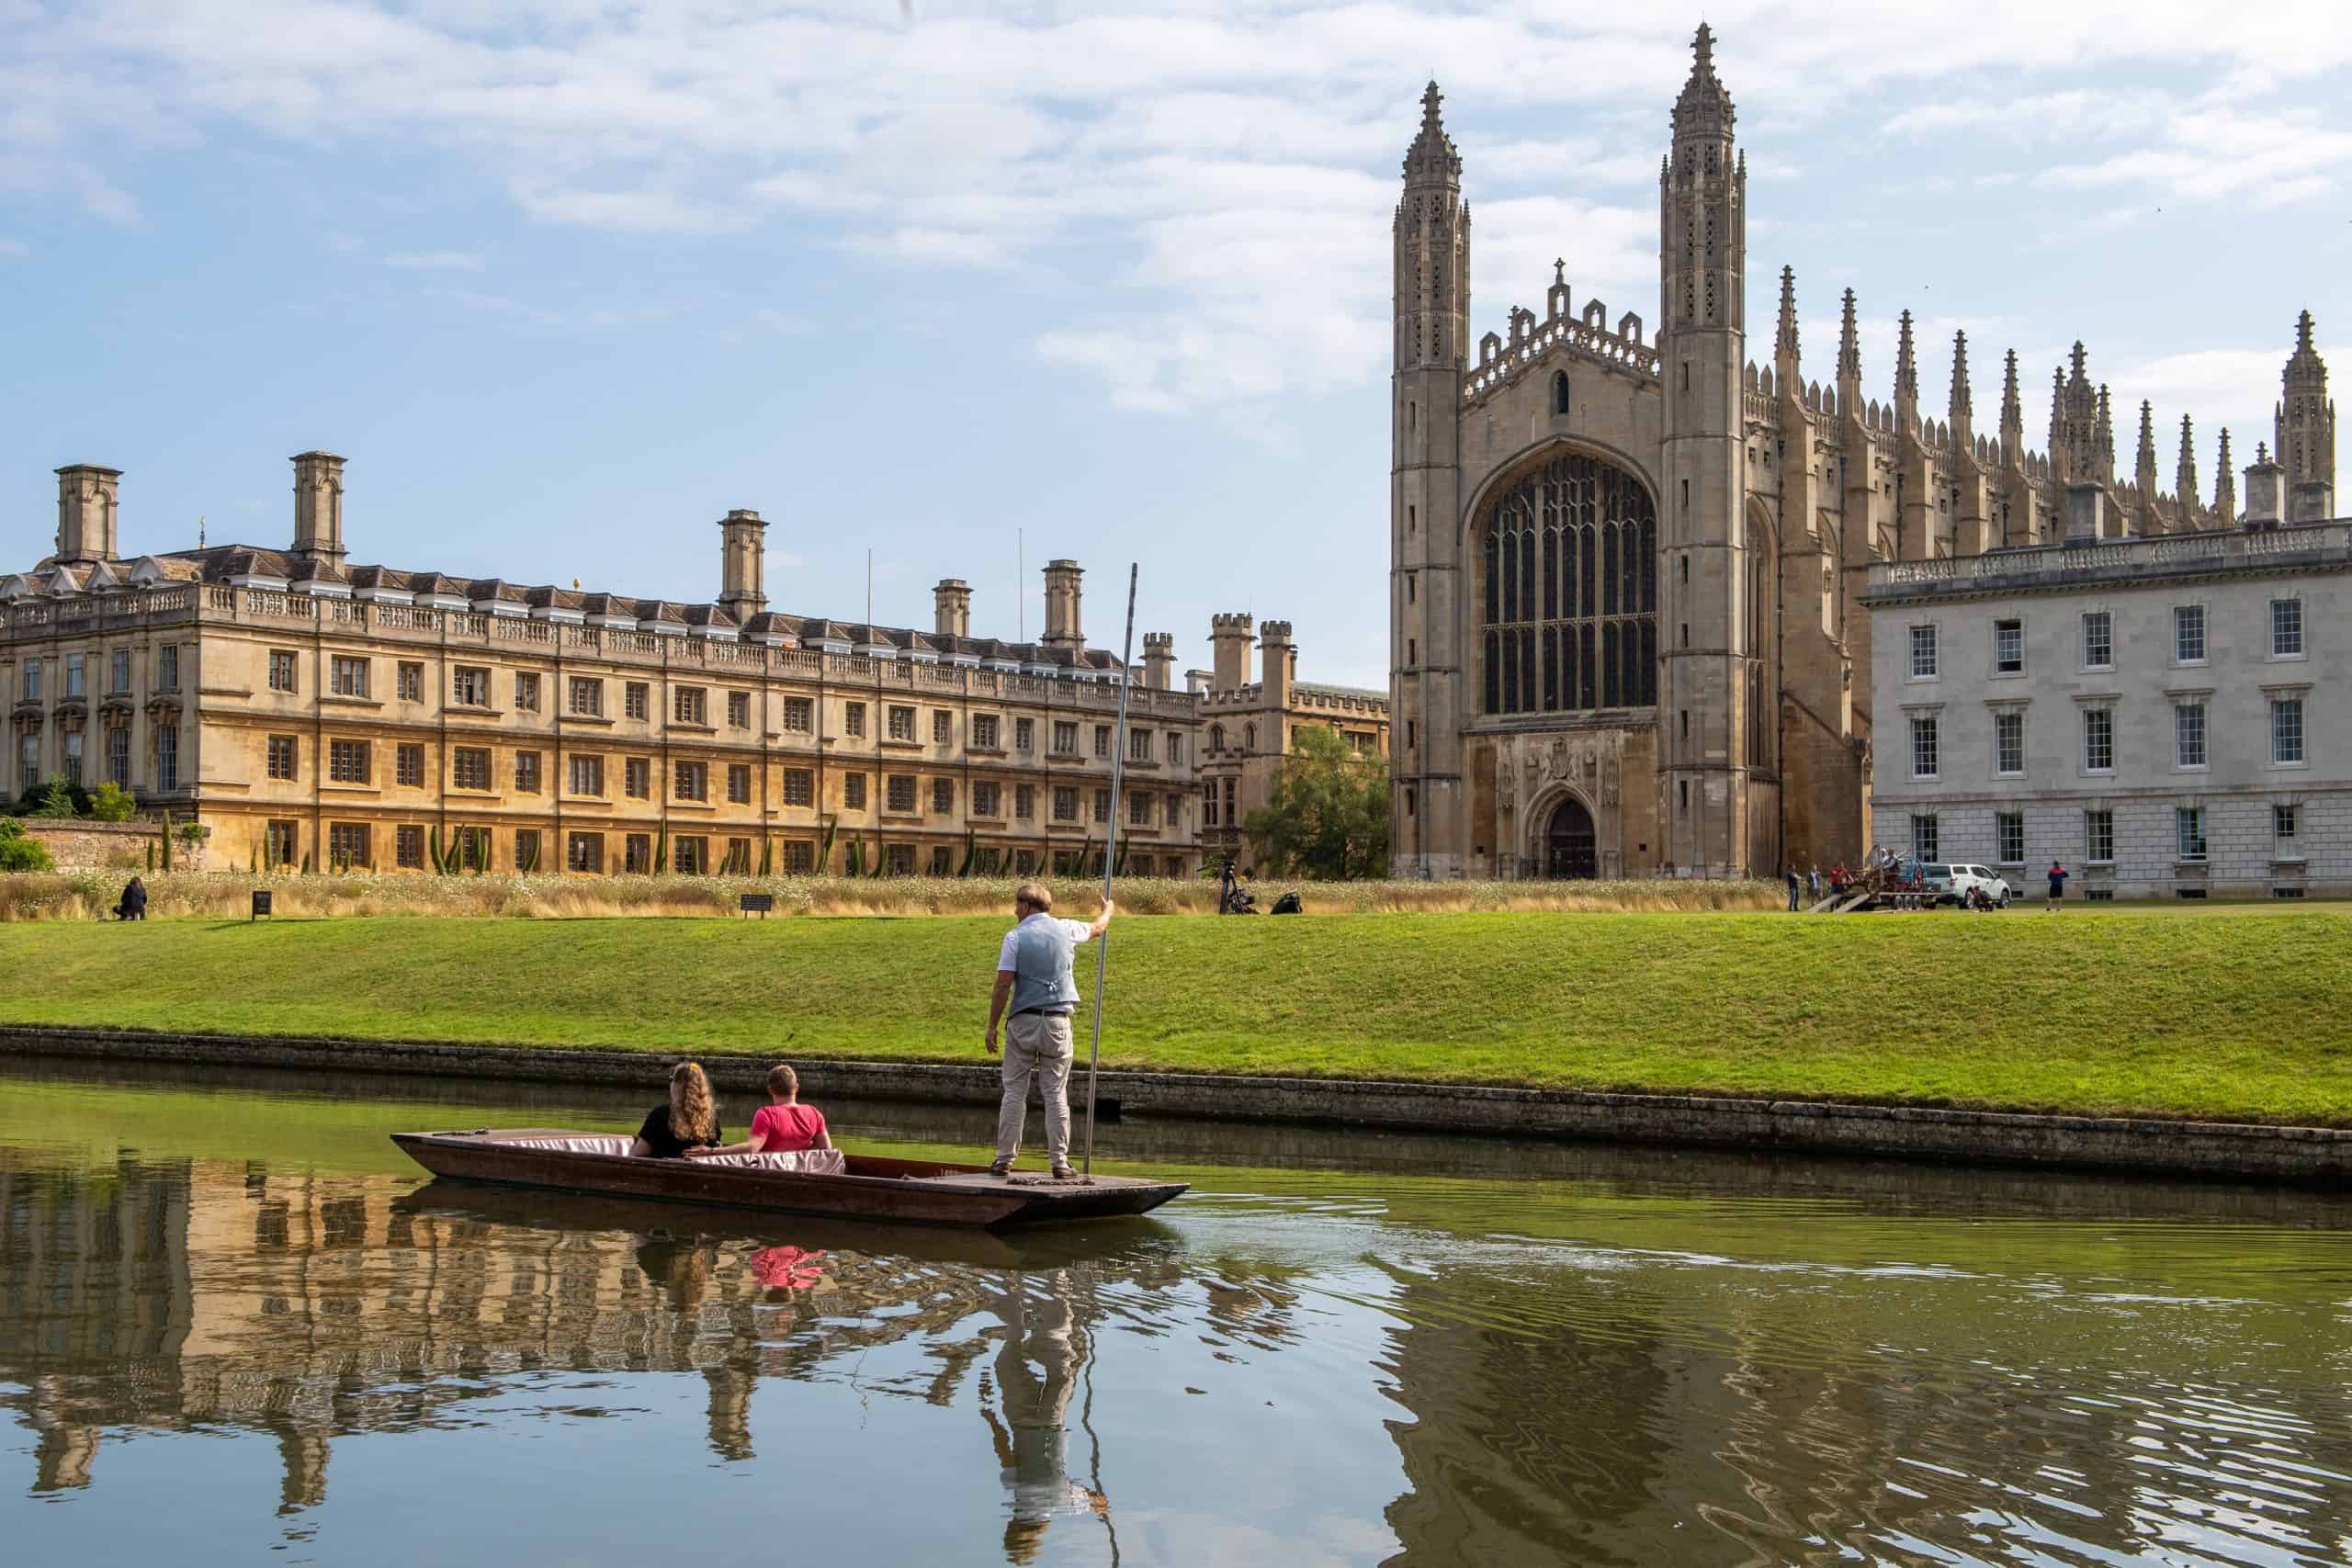 King’s College Chapel water is ‘40% sewage’